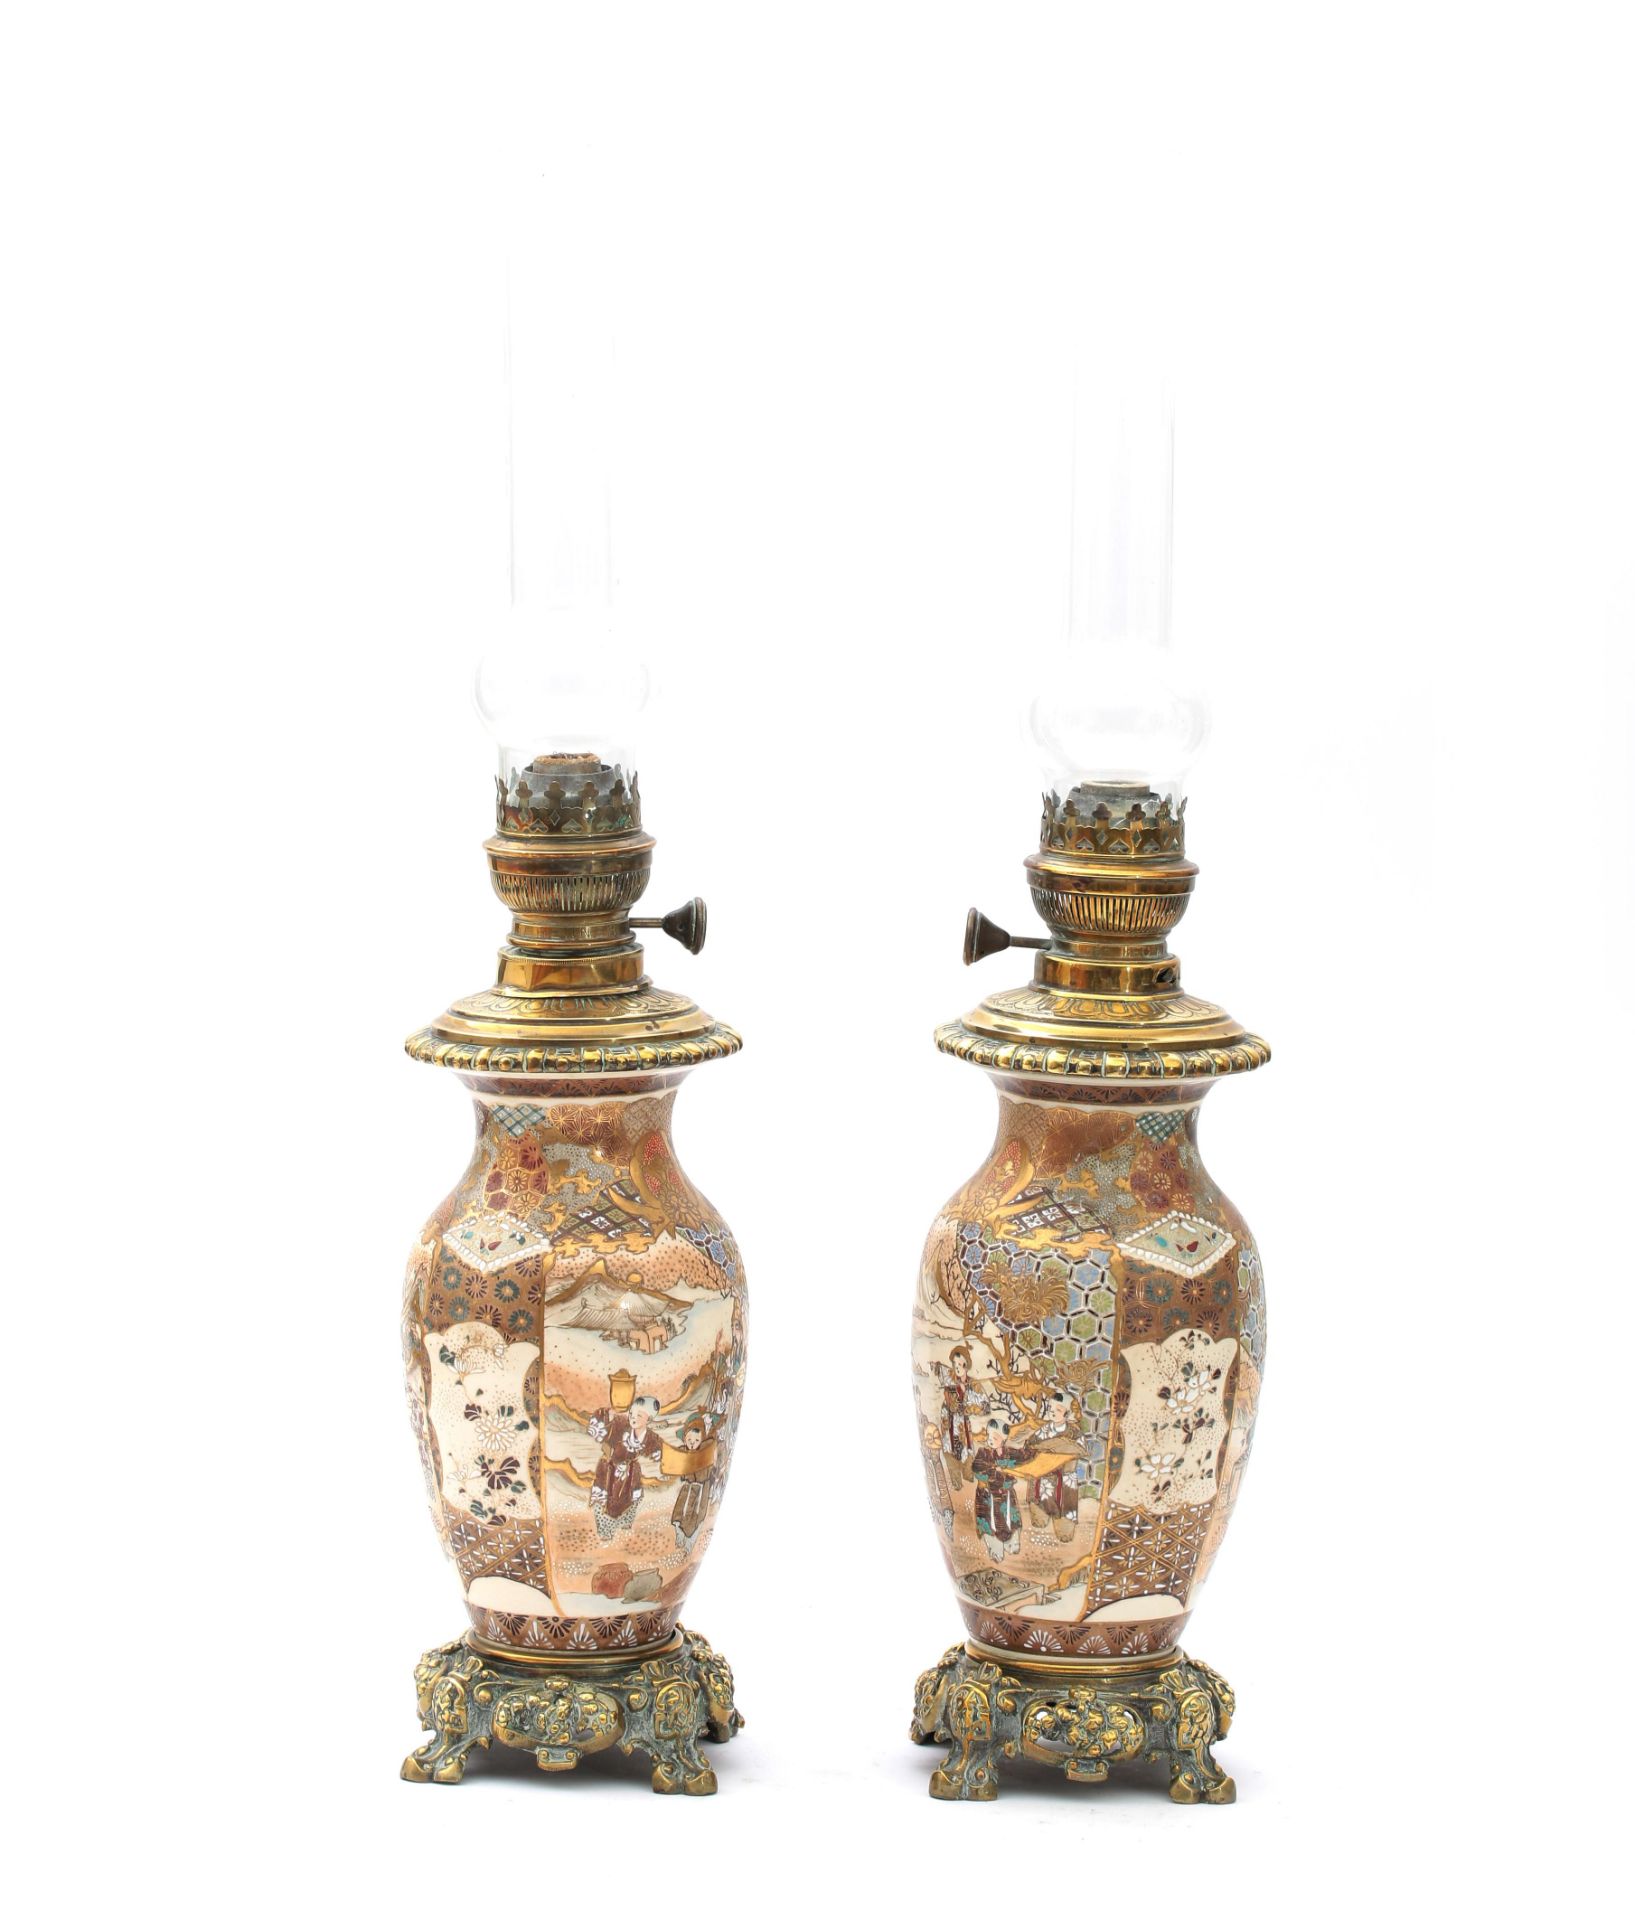 A pair of Japanese Satsuma and bronze mounted oil lamps, decorated with a family in a garden, circa